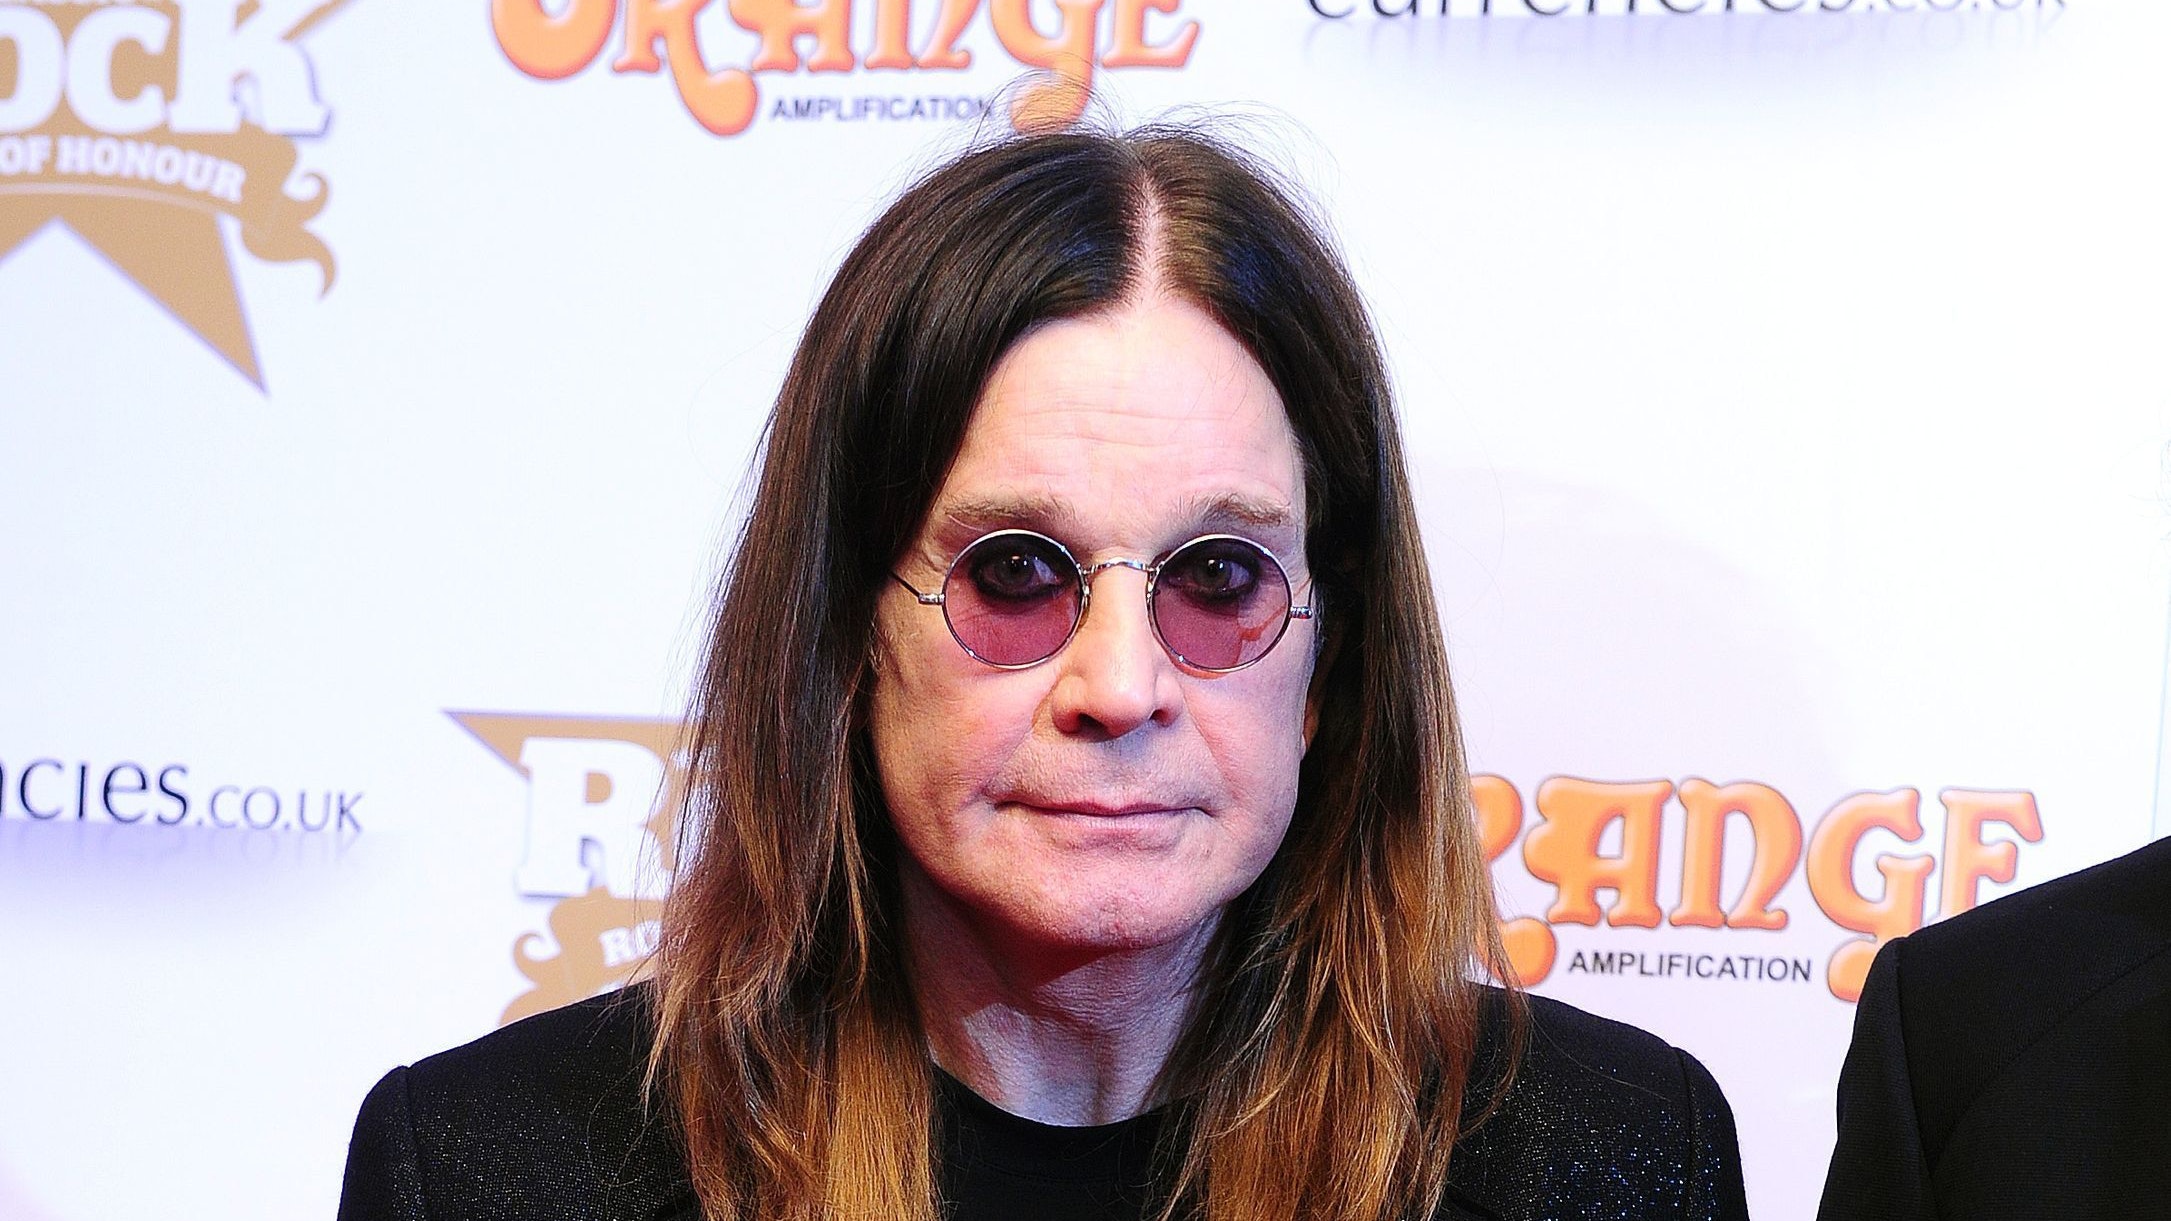 Ozzy Osbourne relives his fight to get sober in new music video | BT